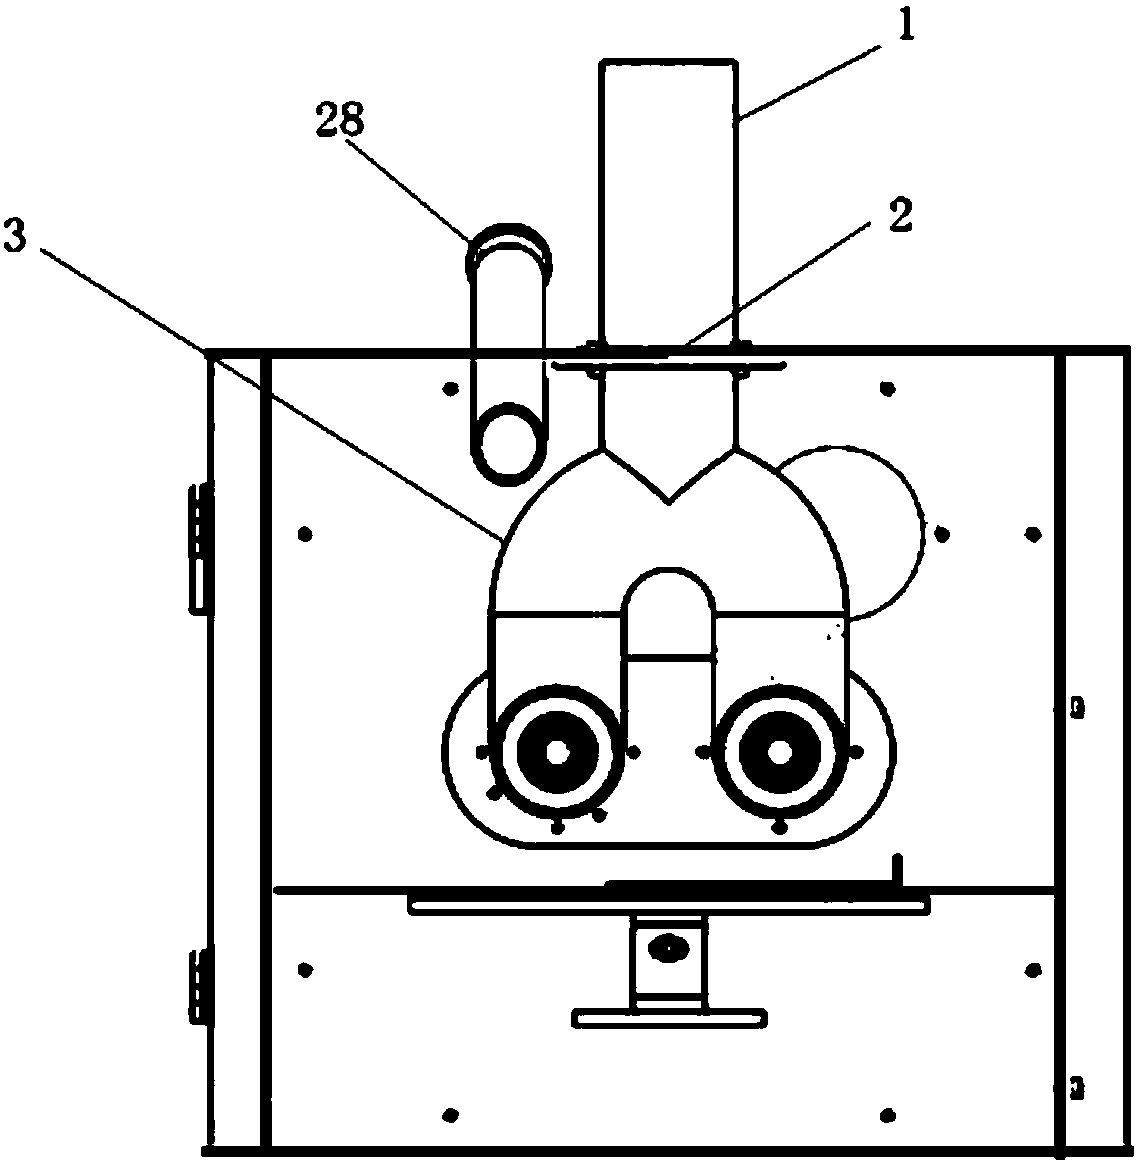 Multi-air-chamber stratified biomass particle burner and burning method